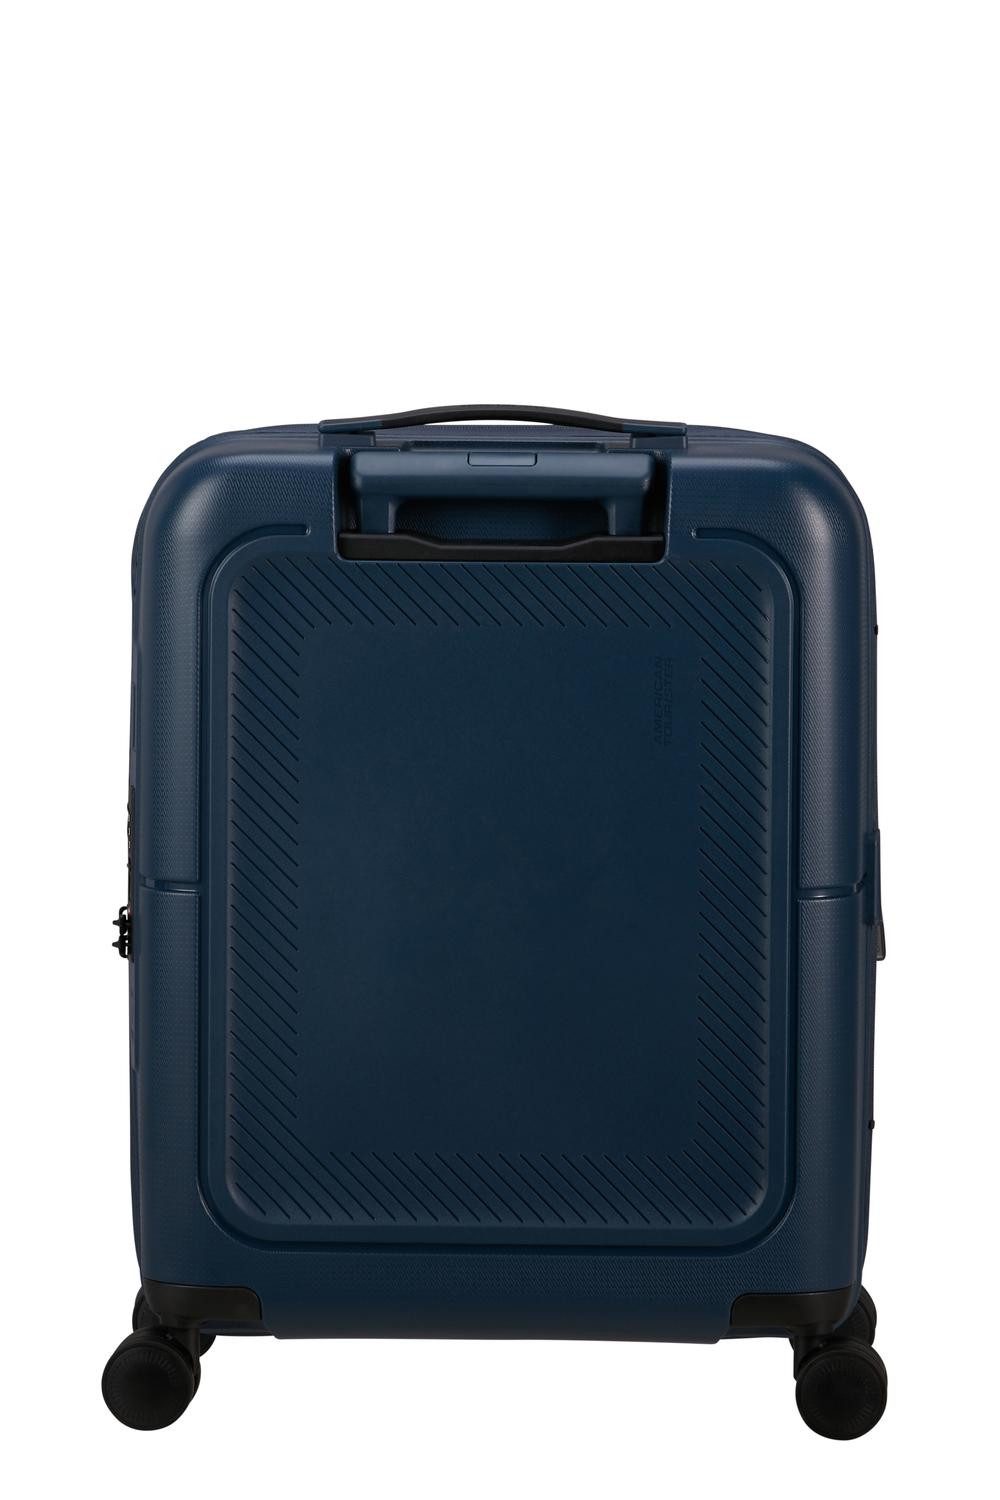 American Tourister® Trolley